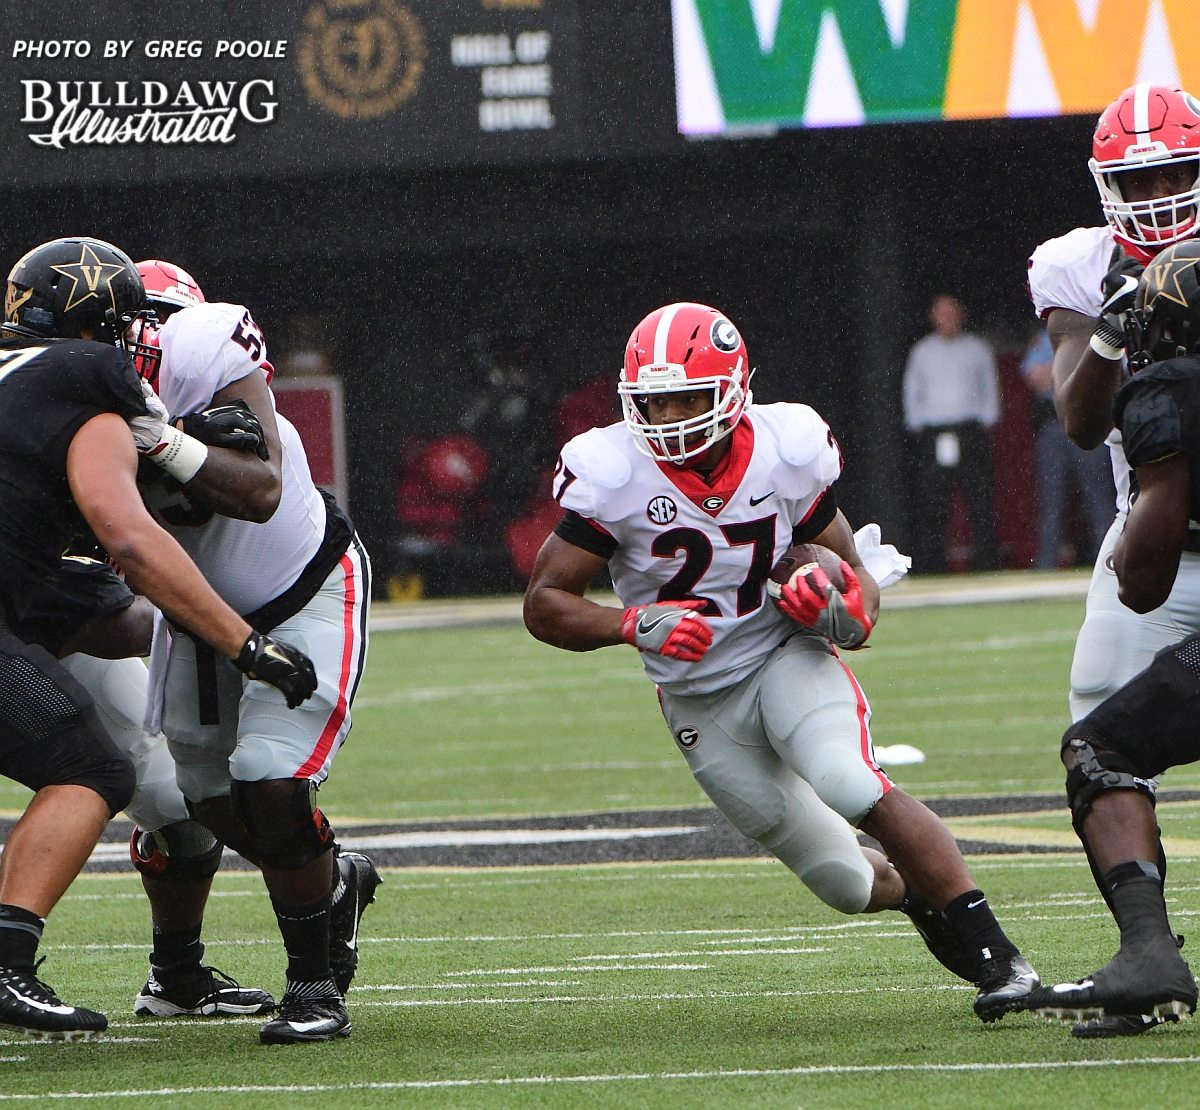 The Georgia O-line opens up a big hole for running back Nick Chubb (27)  -  First half of UGA vs. Vanderbilt -  Saturday, October 7, 2017